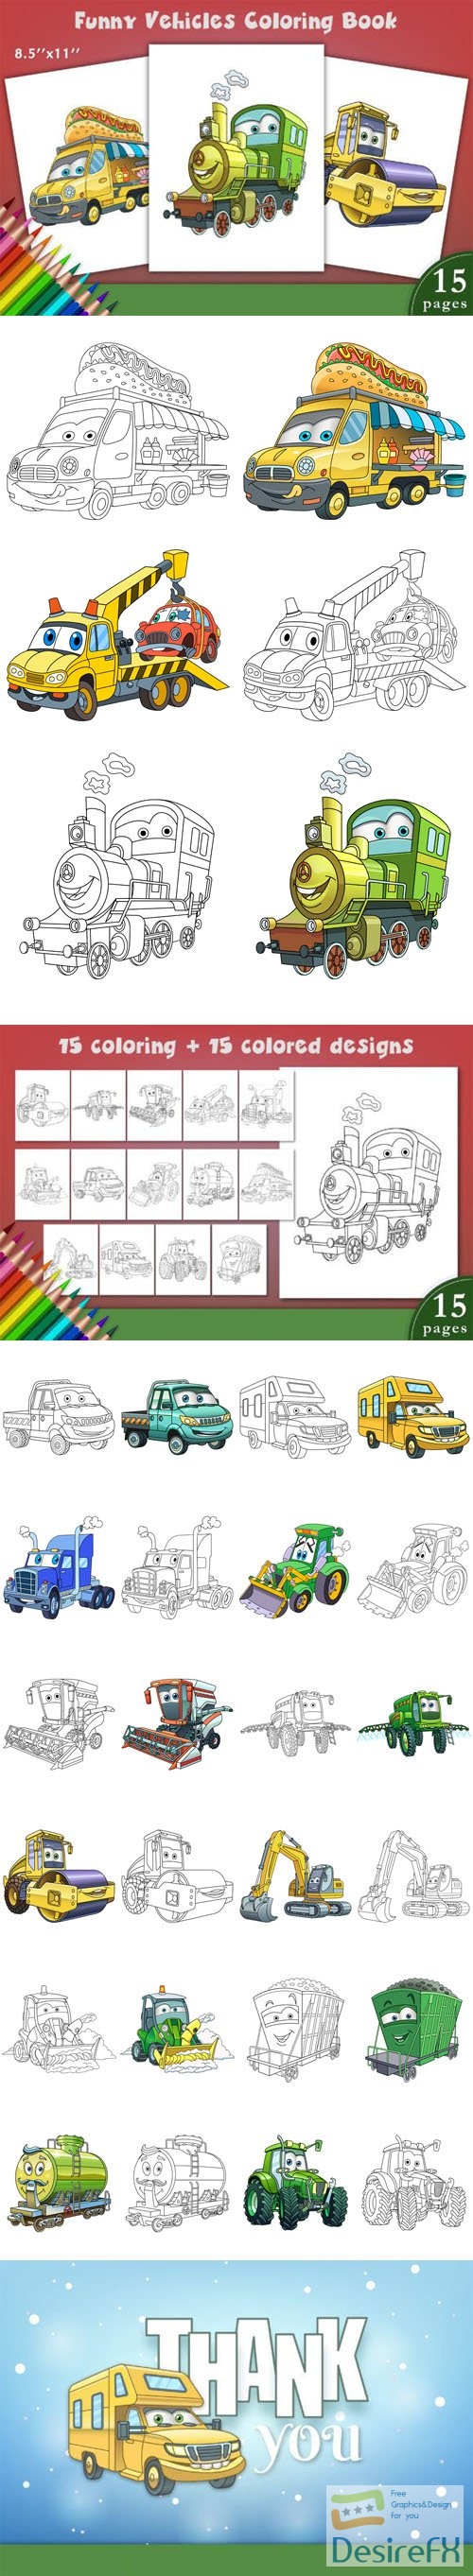 Funny Vehicles Coloring Book Bundle for Kids